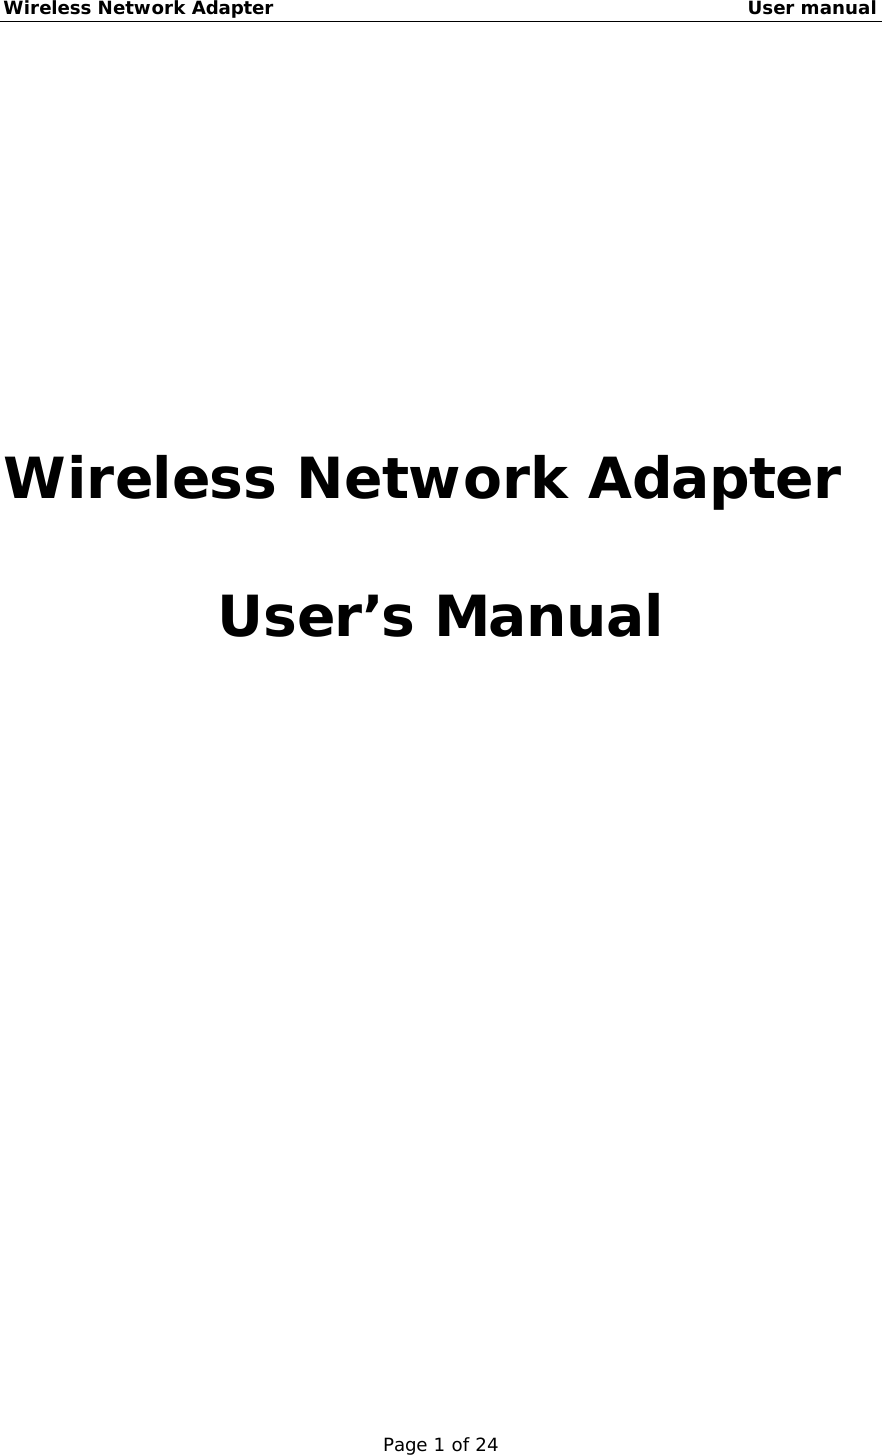 Wireless Network Adapter                                                    User manual Page 1 of 24       Wireless Network Adapter  User’s Manual                    